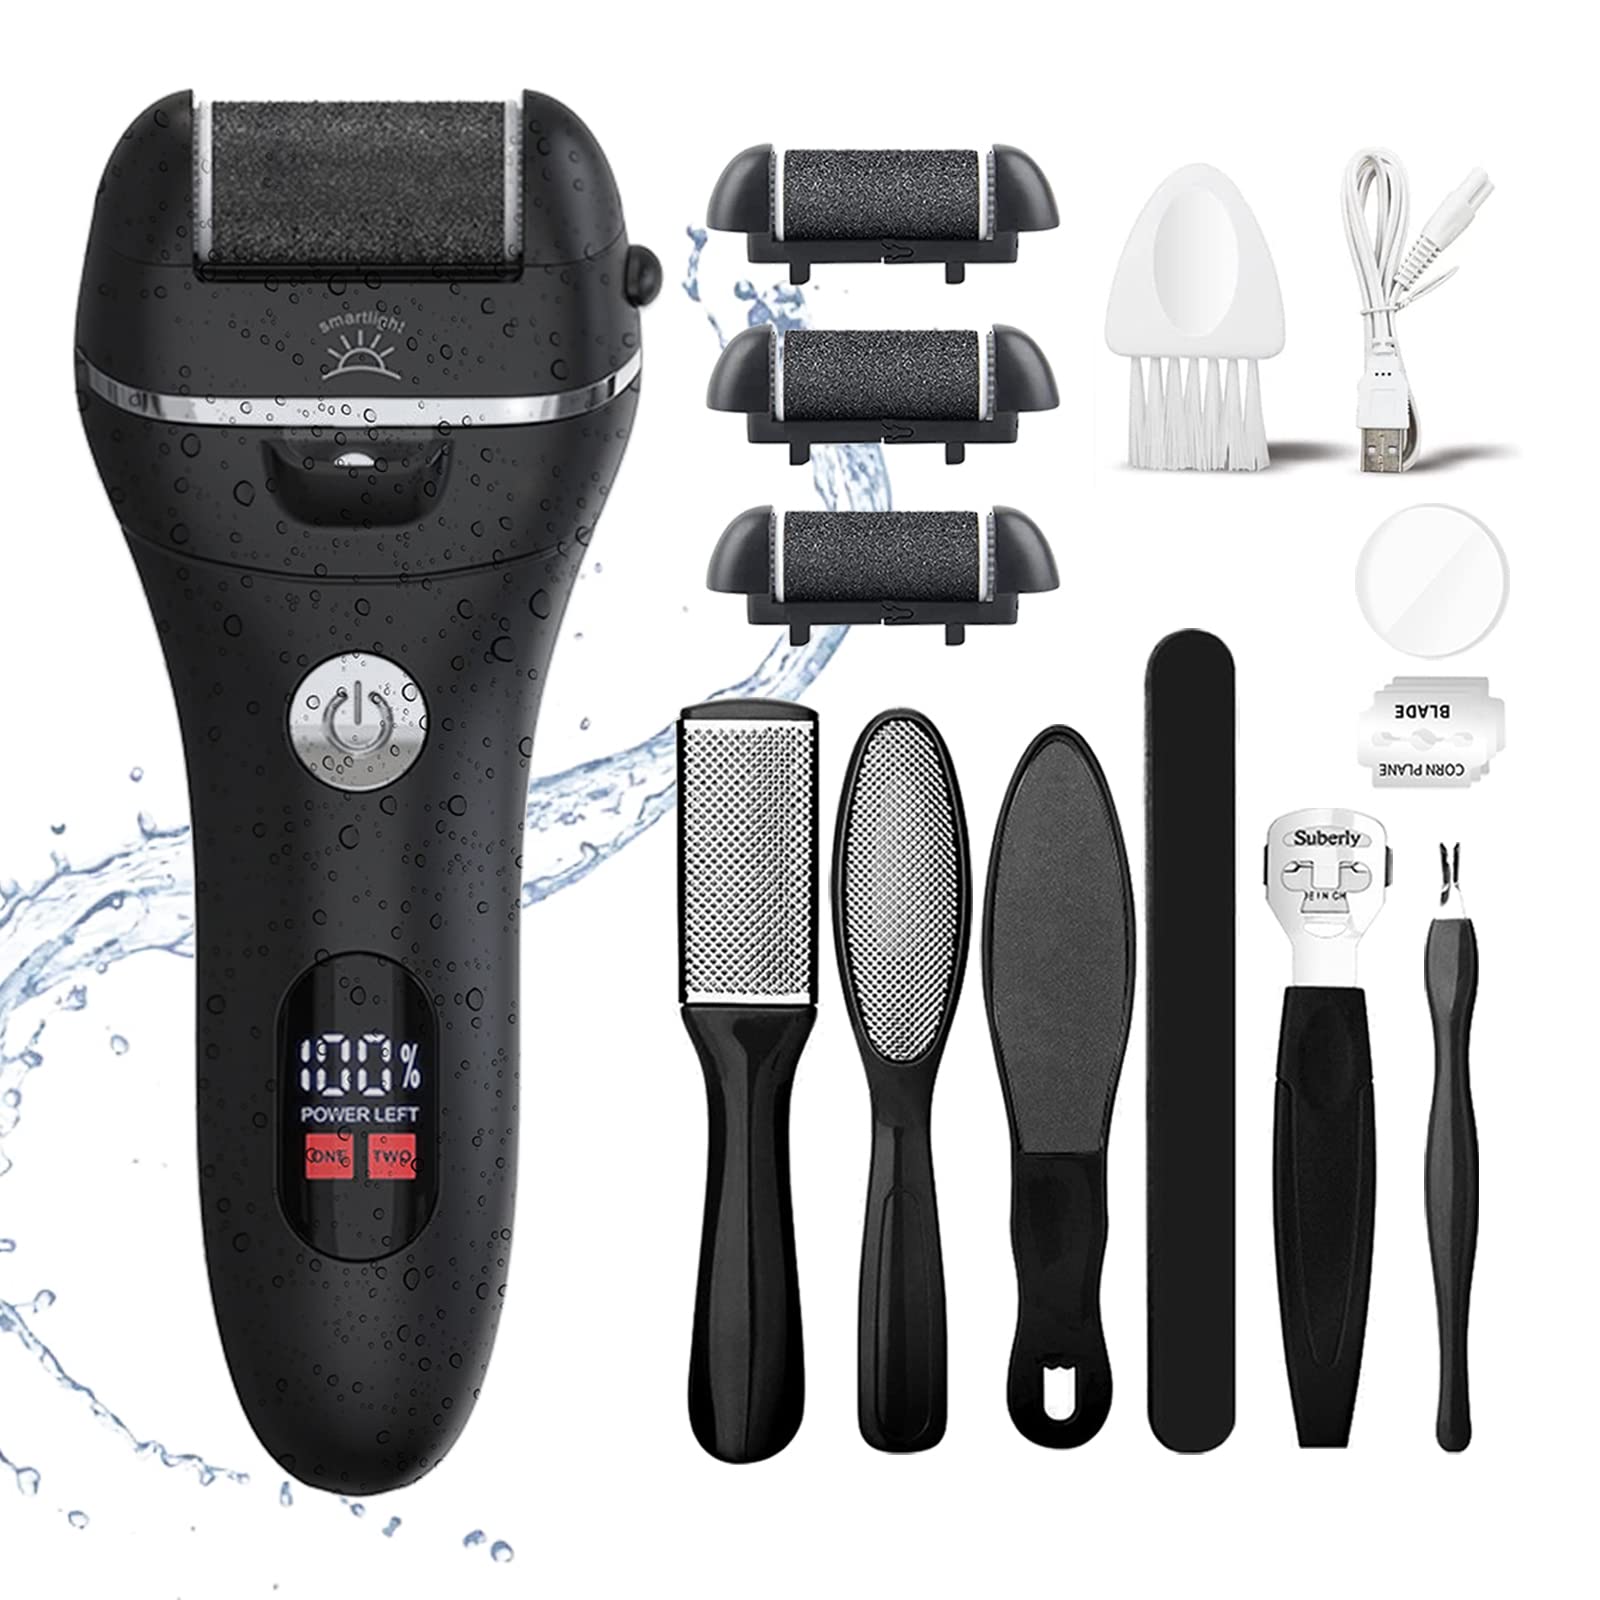 Electric Foot File Callus Remover for Feet, Rechargeable Pedicure